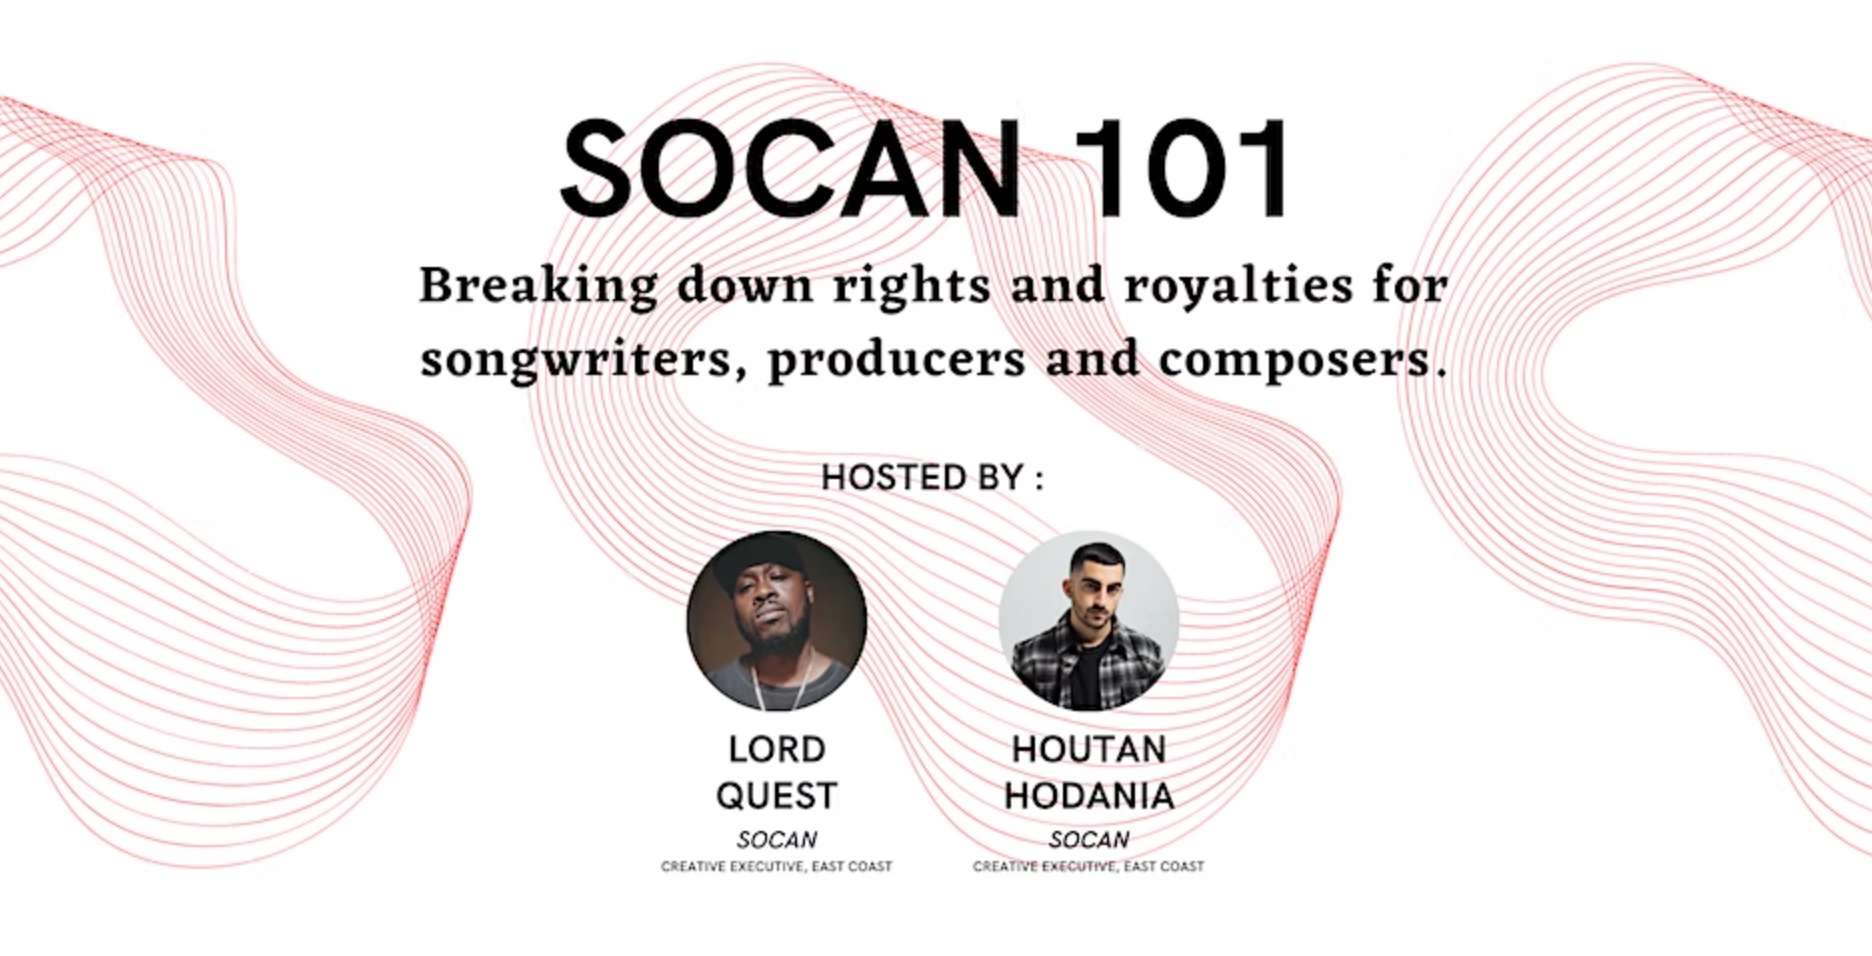 SOCAN 101: Breaking down right and royalties for songwriters, producers, and composers. Hosted by Lord Quest and Houtan Hodania